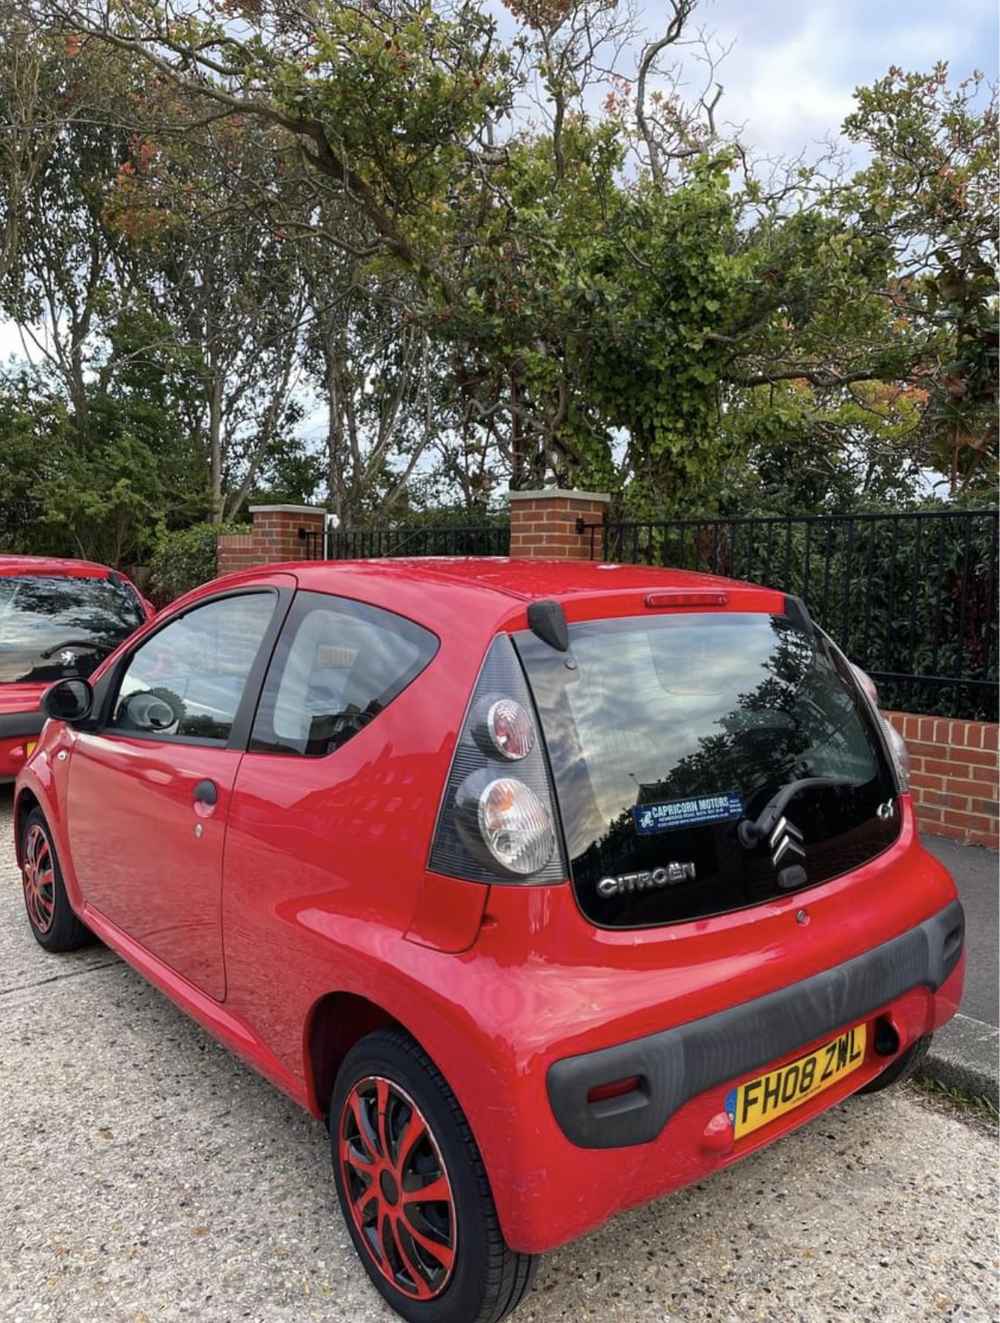 Photograph of FH08 ZWL - a Red Citroen C1 parked in Hollingdean by a non-resident and stored here whilst a dodgy car dealer attempts to sell it. The third of five photographs supplied by the residents of Hollingdean.